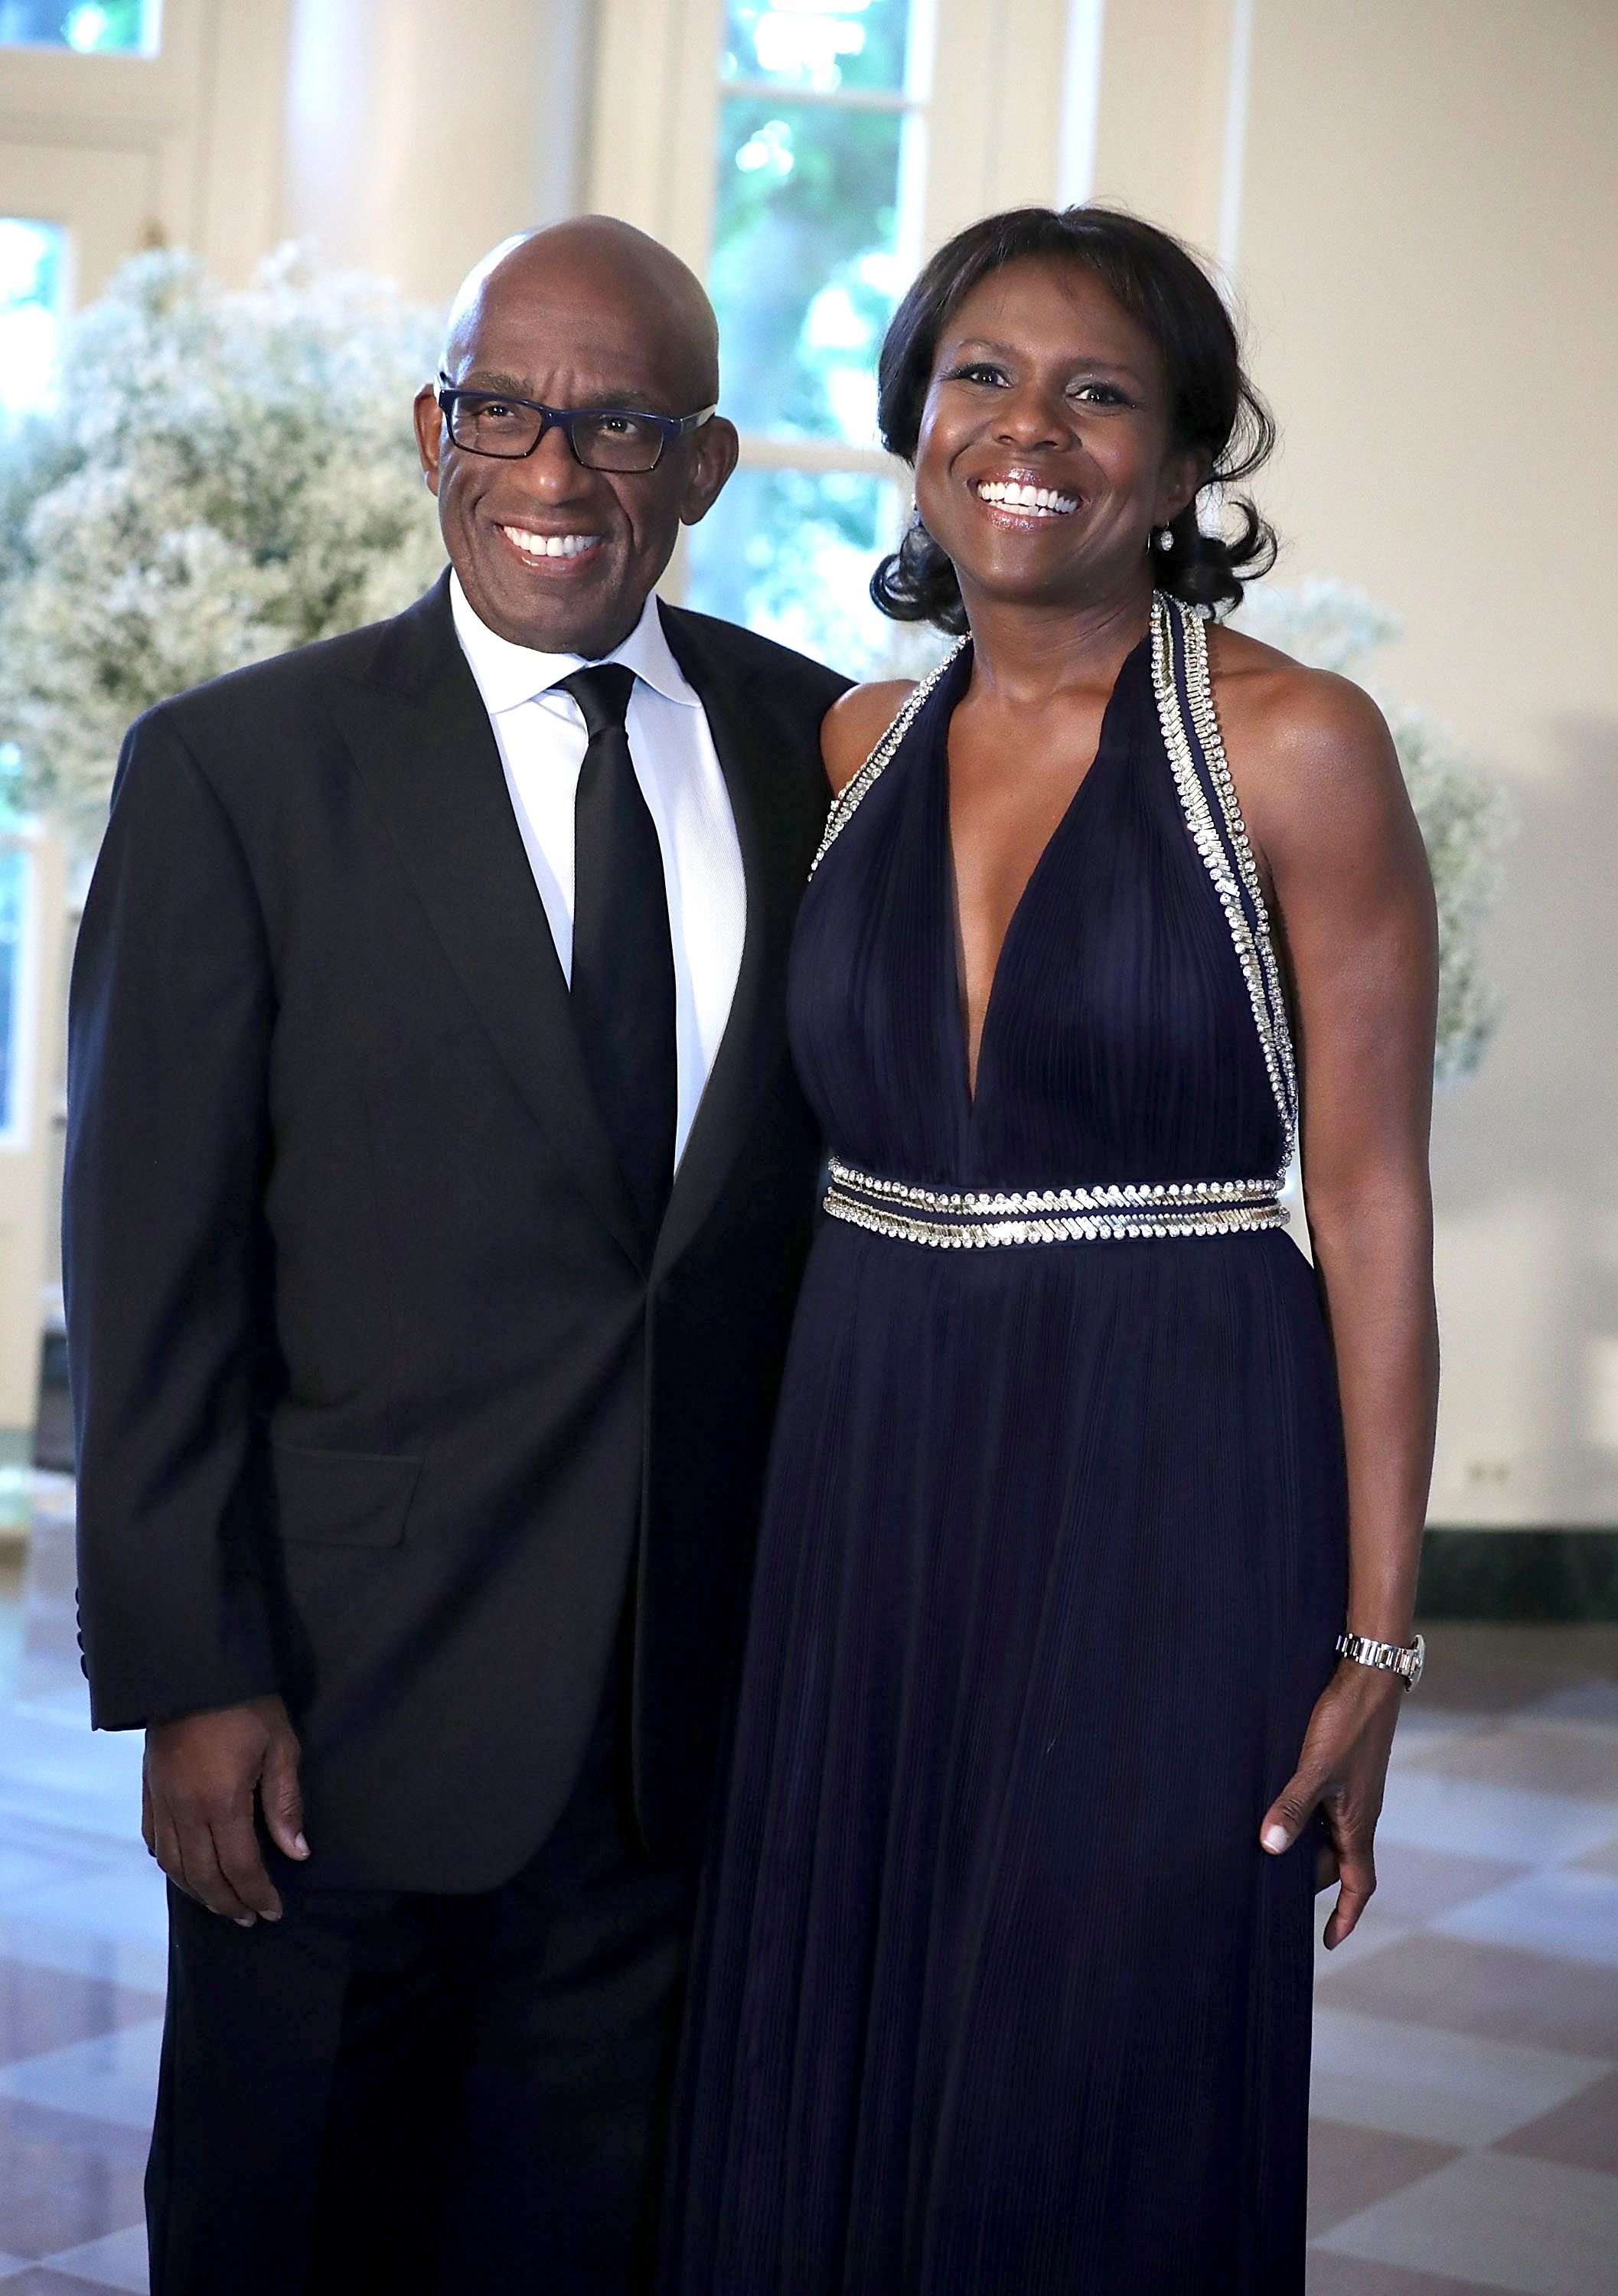 Weather reporter Al Roker and wife Deborah Roberts arrive at the 2016 Nordic State Dinner of former US President Barack Obama in Washington. | Photo: Getty Images